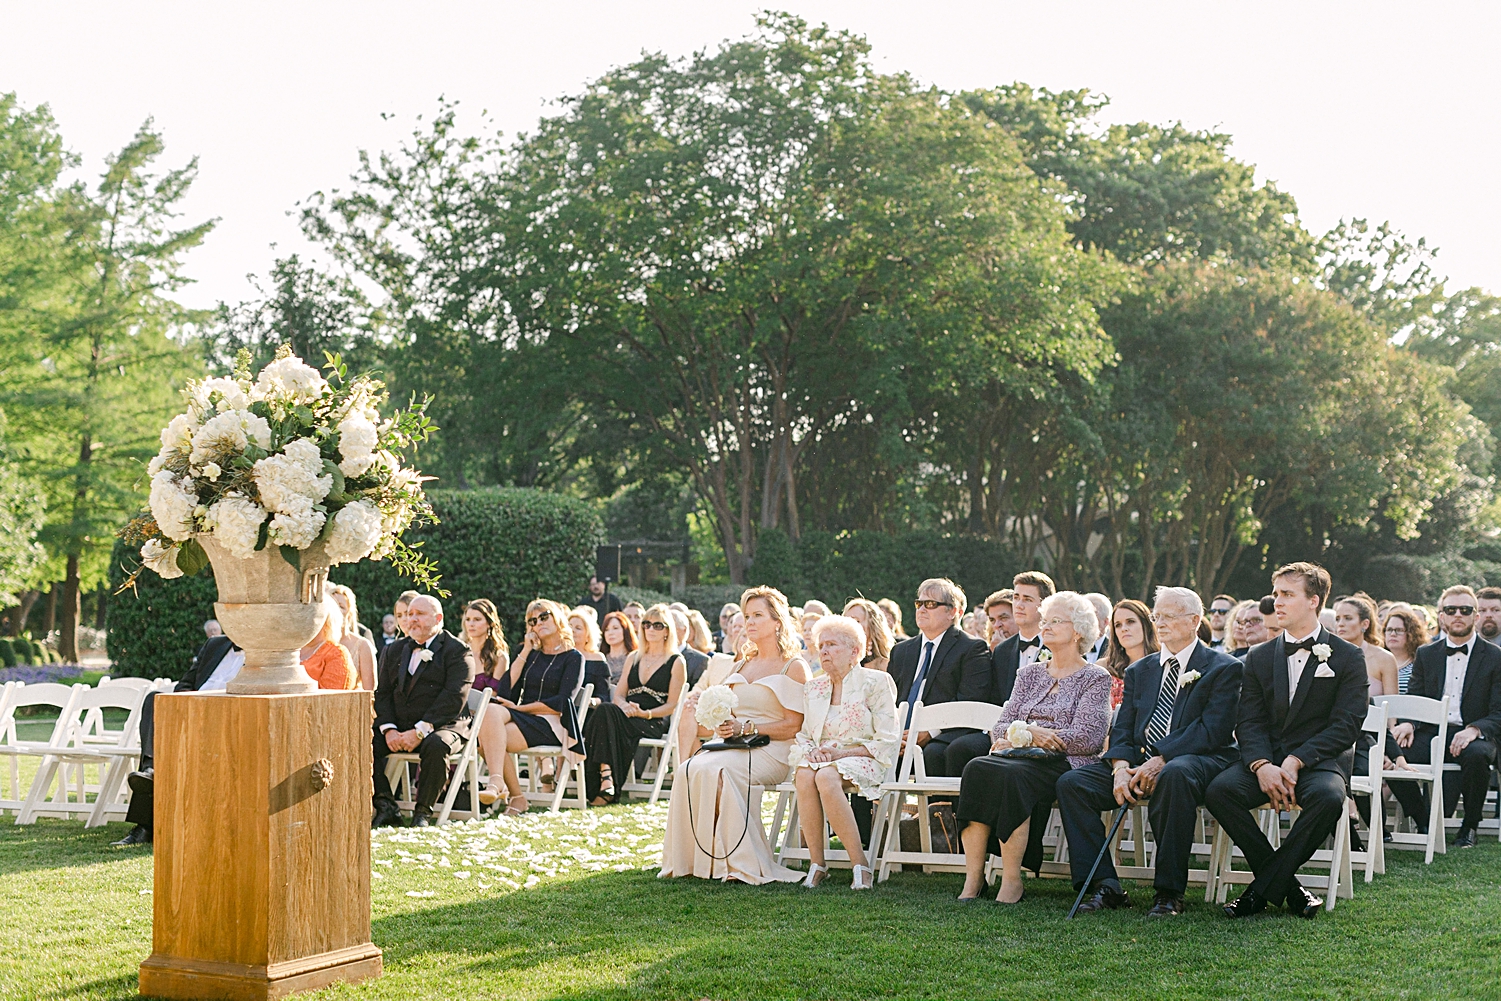 Dallas Arboretum wedding ceremony guests sitting in white chairs in front of green trees